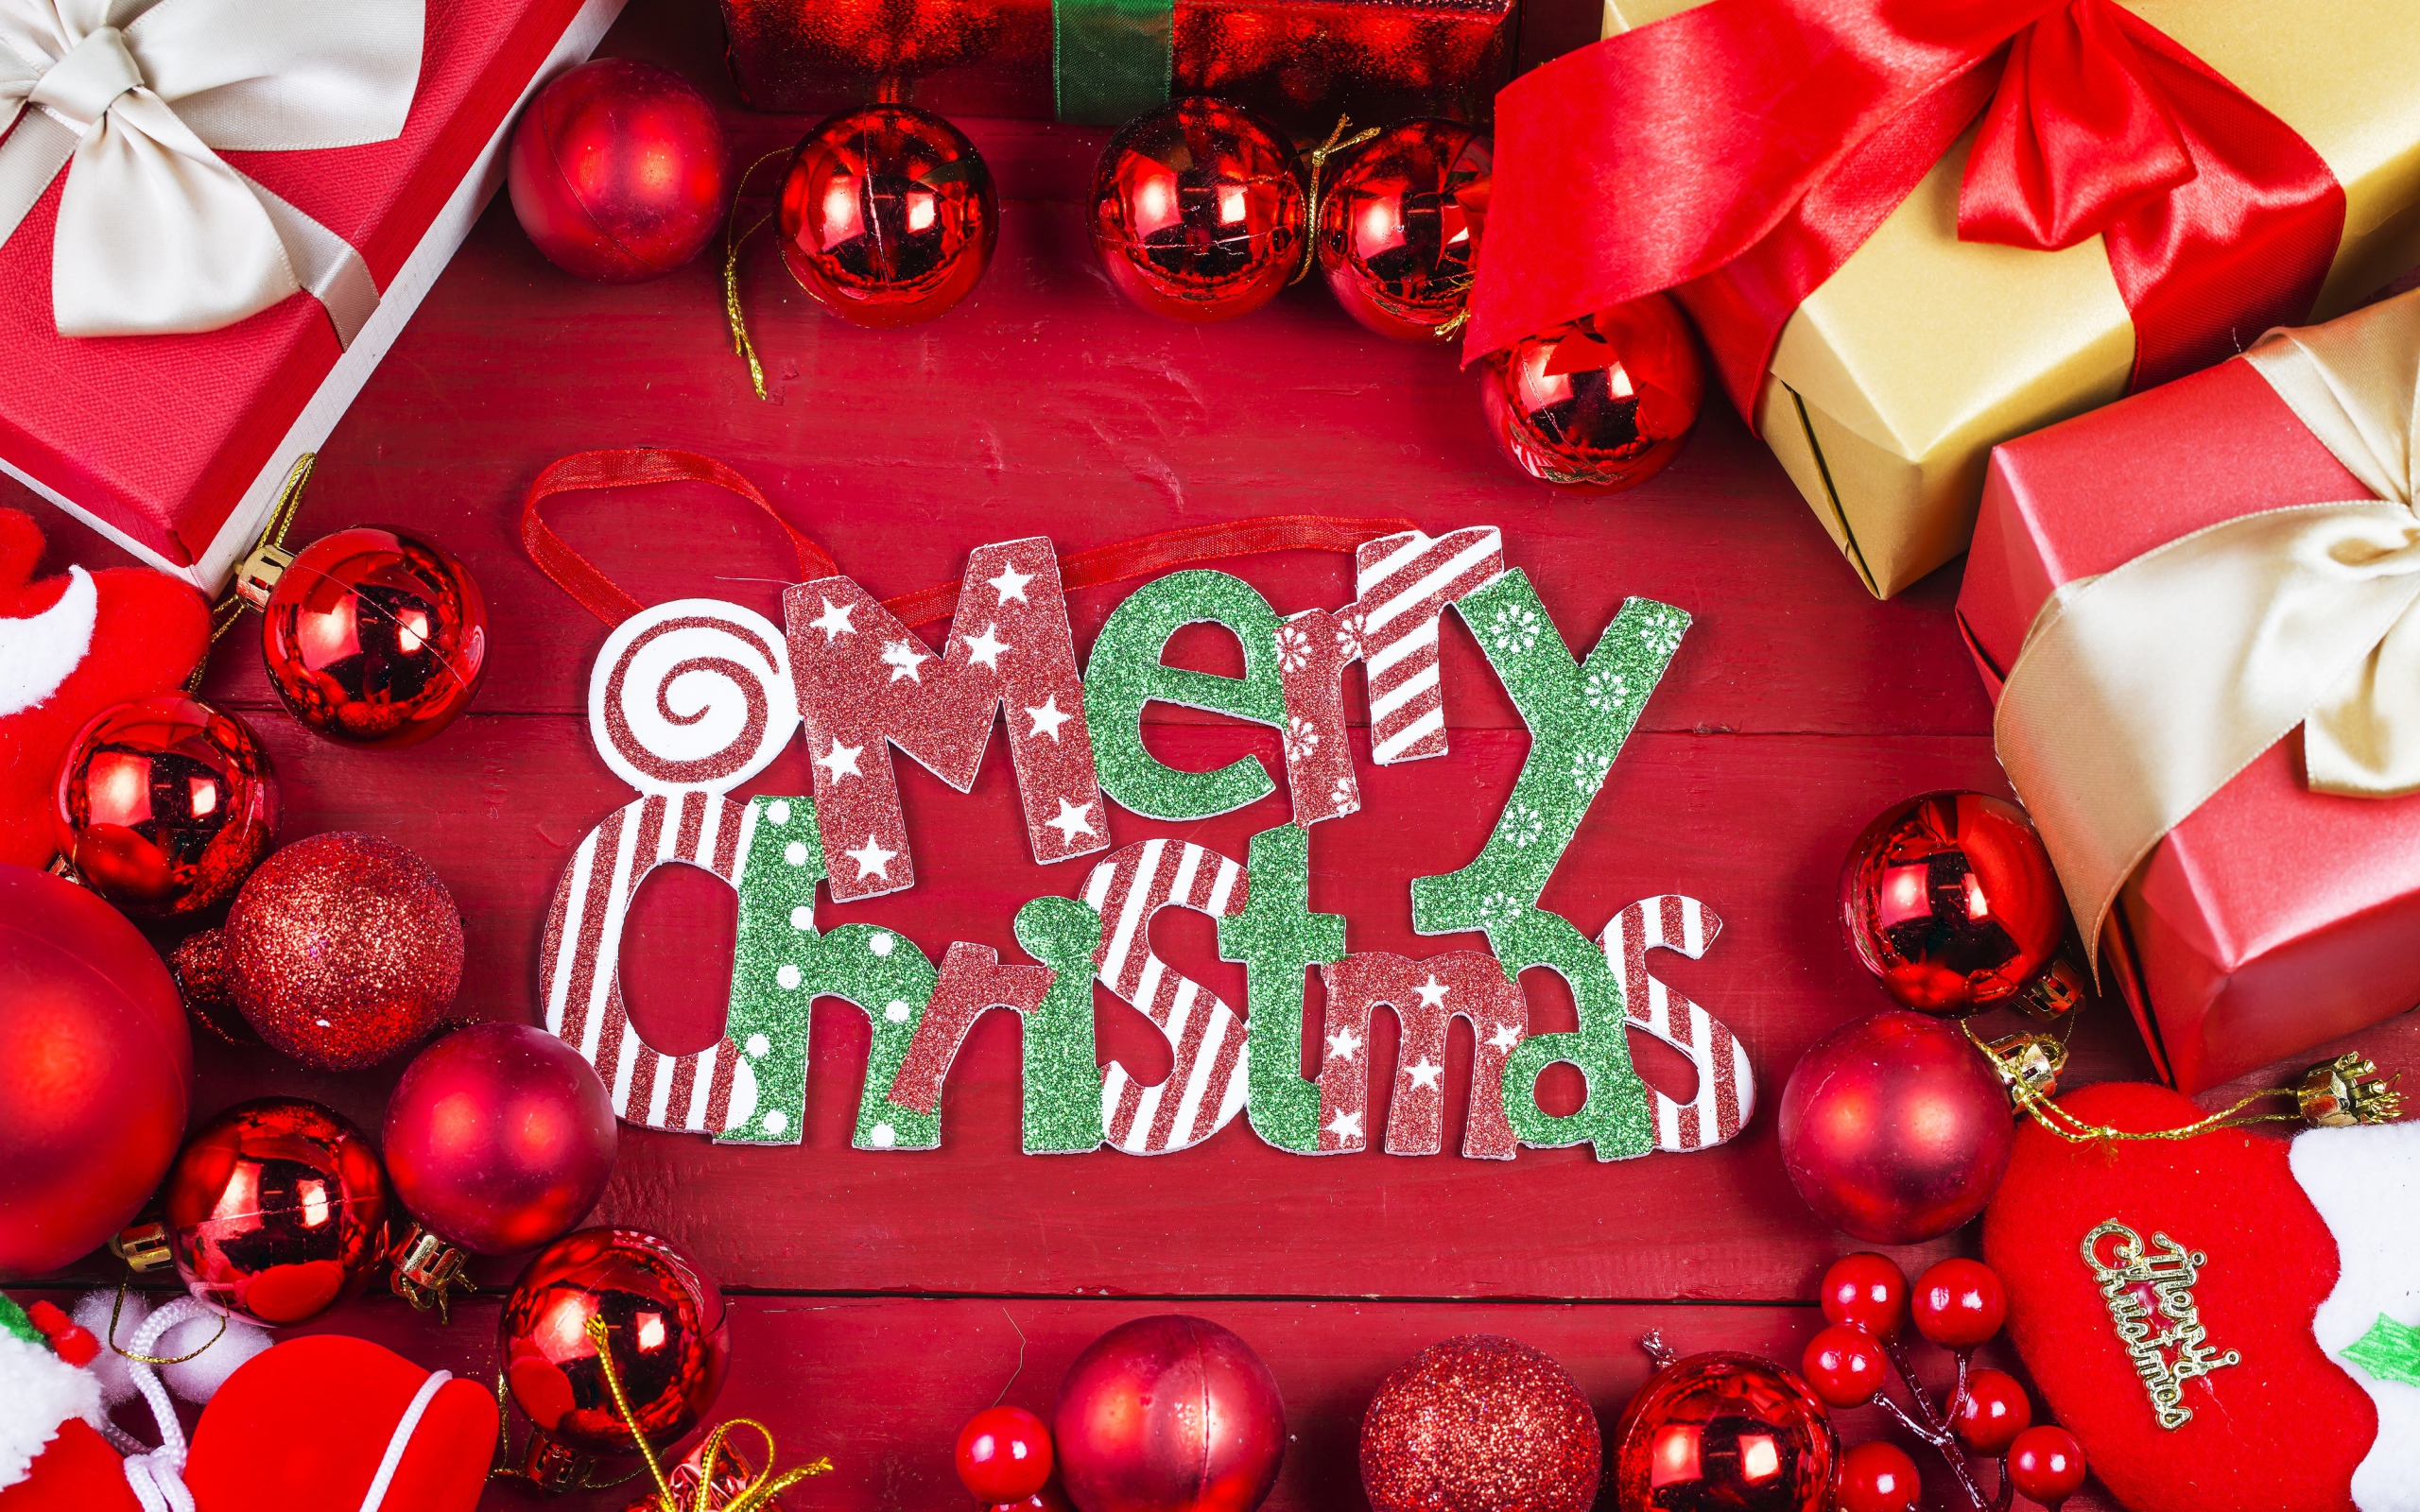 Merry Christmas holiday inscription on a red background with toys and gifts